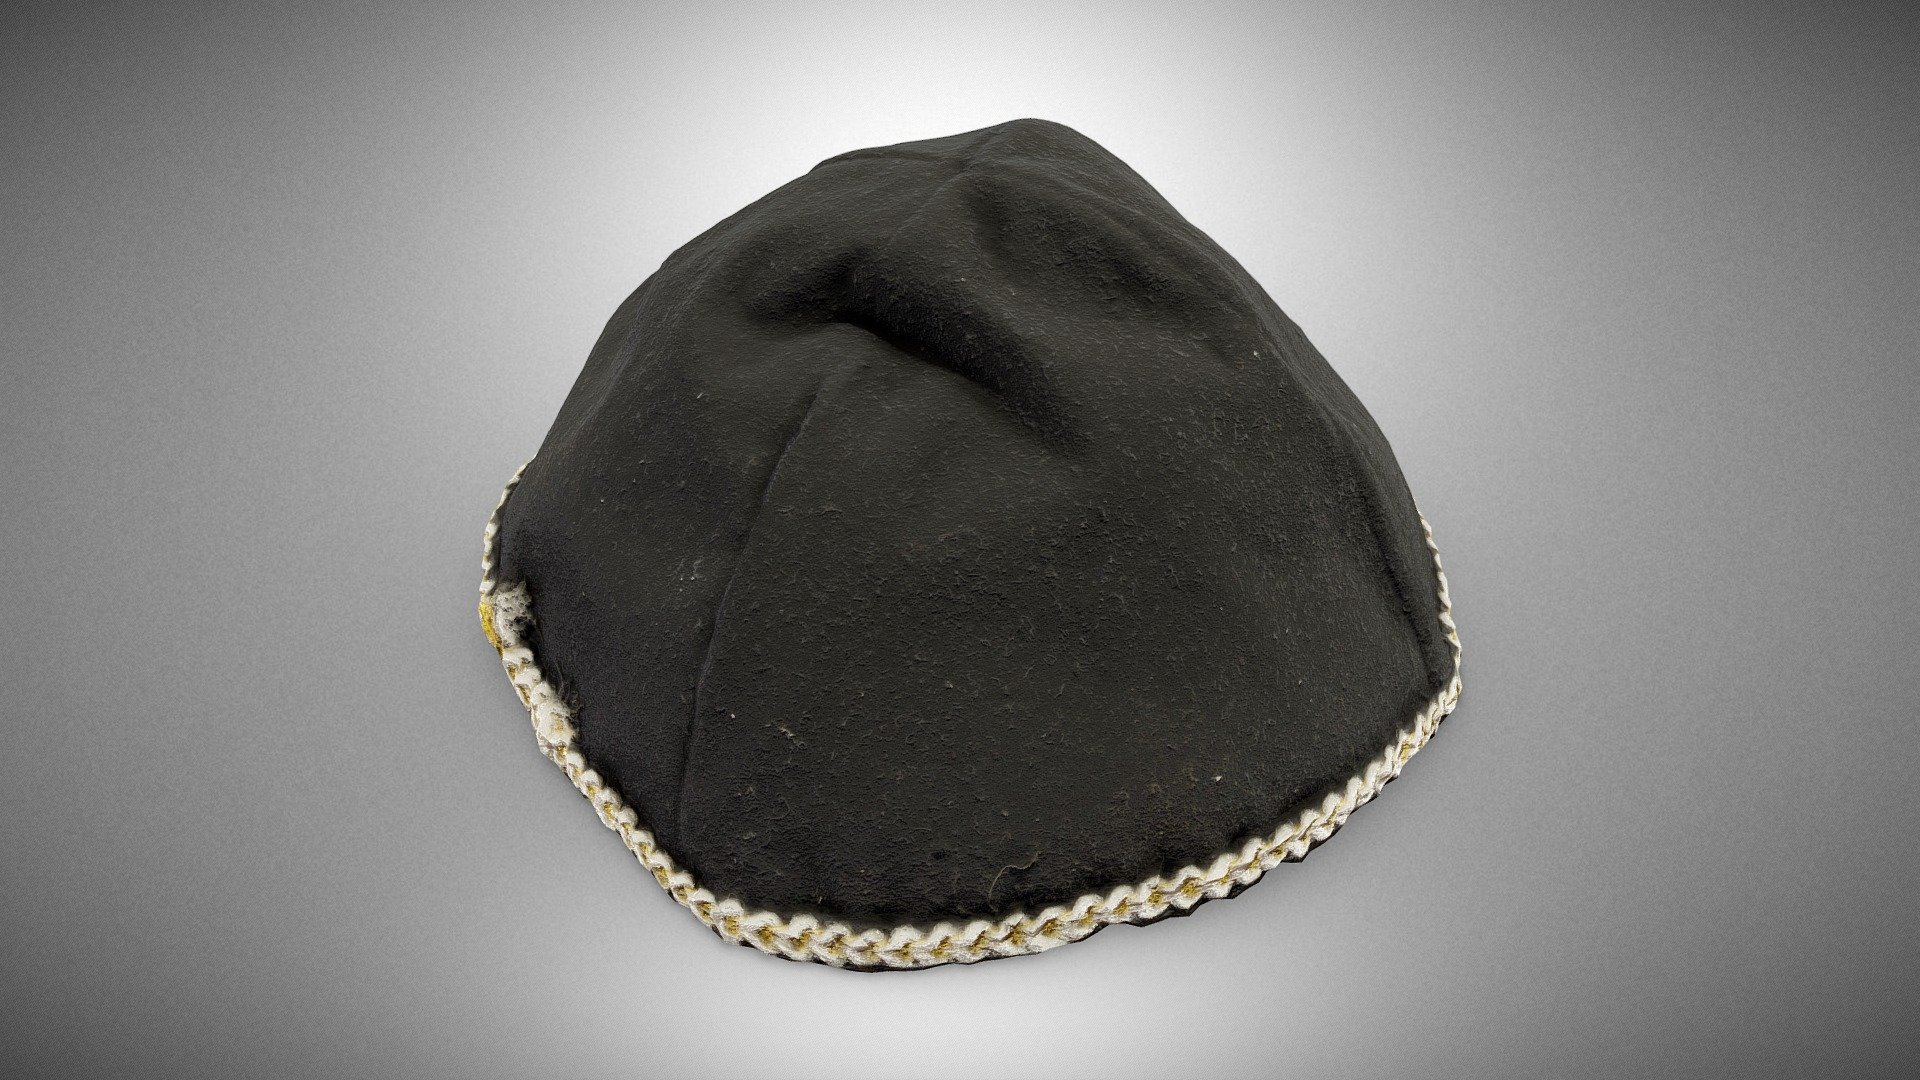 Full name: Black kippah from the house of Szymon Kluger in Oświęcim, Poland

Known as a kippah or a yarmulke, it seems to be the most universally recognised symbol of Jewish religiosity and culture.  What is the origin of the custom of wearing this small brimless skullcap by Jewish men atop their head? The practice of covering only the crown of one’s head is not rooted in any Biblical or Talmudic precepts. Instead, its foundation lies in the description of the clothes of a high priest (Exodus 28:4, 36-39) or in the traditional headwear of Talmudic scholars in Babylonia. 

For more images and further information, visit: https://muzea.malopolska.pl/en/objects-list/3009

Inventory number: MZ-336-O

Localisation of the physical object: Auschwitz Jewish Center, Oświęcim, Poland  

Digitalisation: Regional Digitalisation Lab, Małopolska Institute of Culture in Kraków, Poland; “Virtual Museums of Małopolska” project - Black kippah from the house of Szymon Kluger - Download Free 3D model by Virtual Museums of Małopolska (@WirtualneMuzeaMalopolski) 3d model